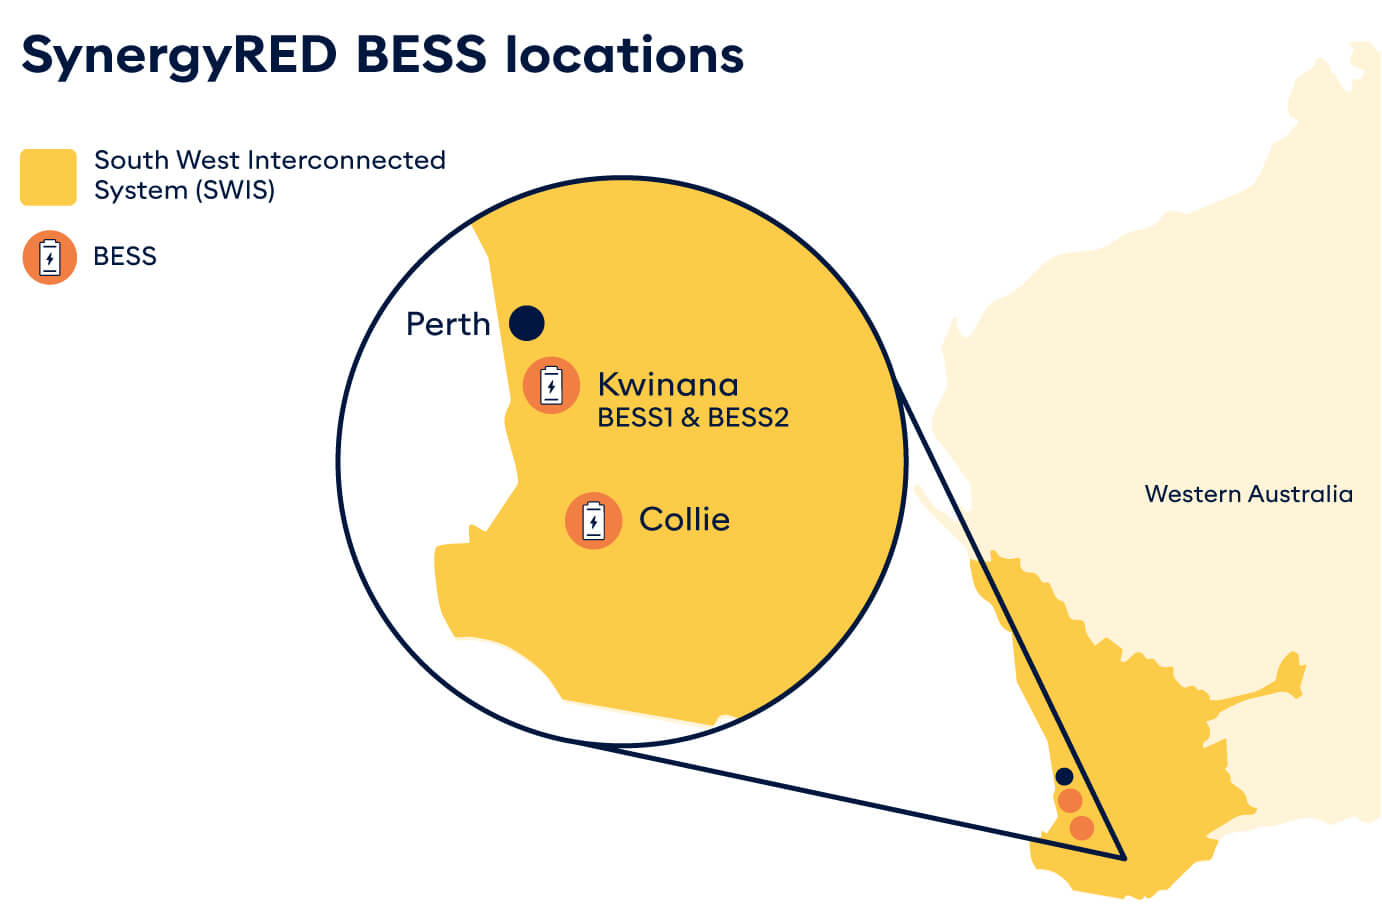 Illustrated map showing the locations of all the large-scale BESS SynergyRED has in development or operational across WA